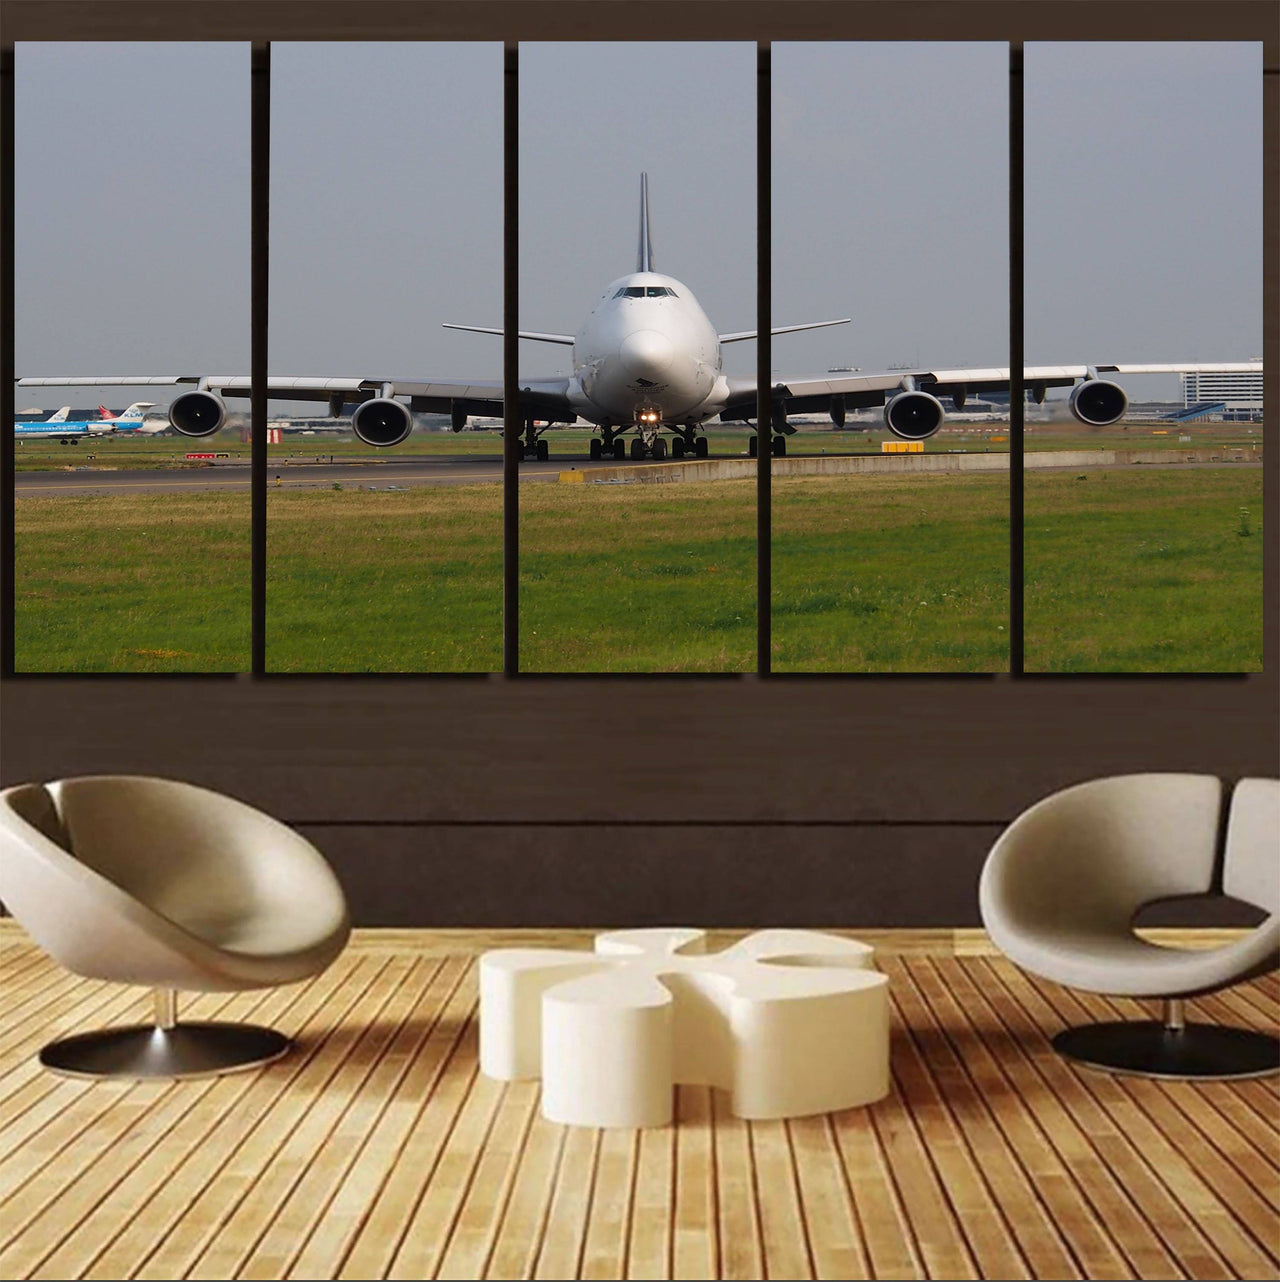 Face to Face with Boeing 747 Printed Canvas Prints (5 Pieces) Aviation Shop 